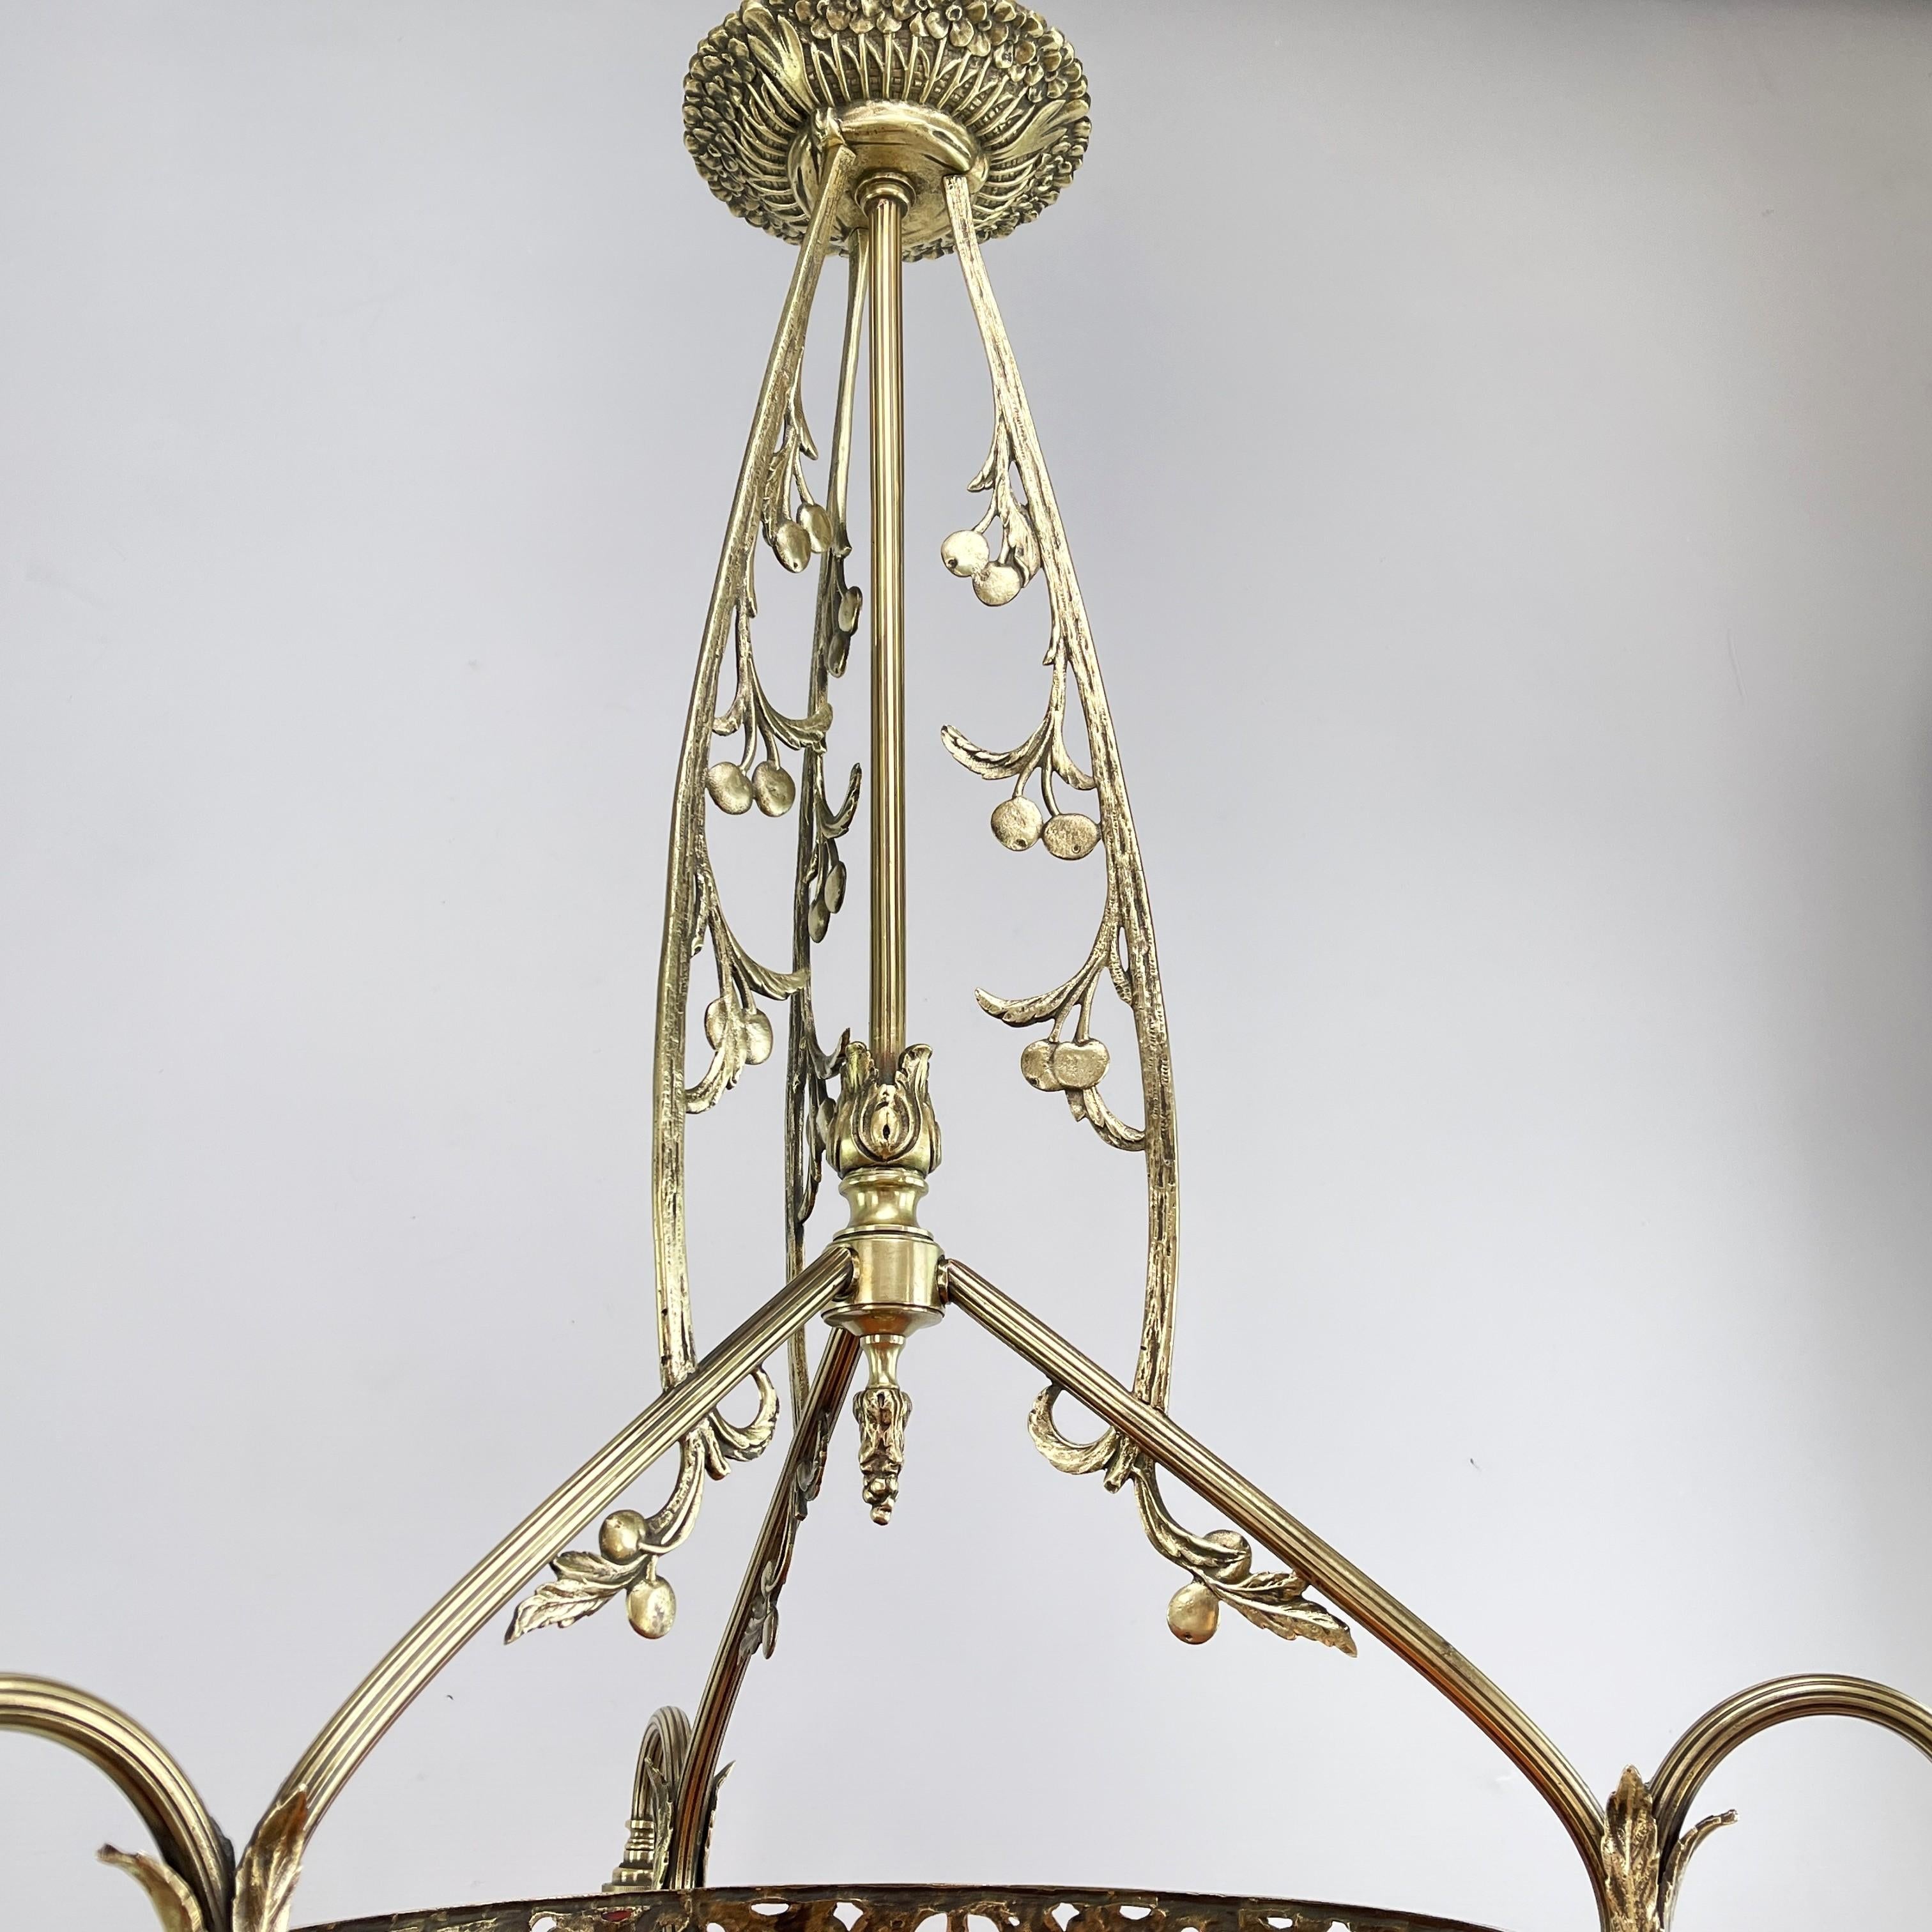 ART DECO ceiling lamp, signed Schneider

ART DECO ceiling lamp is a remarkable example of craftsmanship and style of the early 20th century. 

The signature 